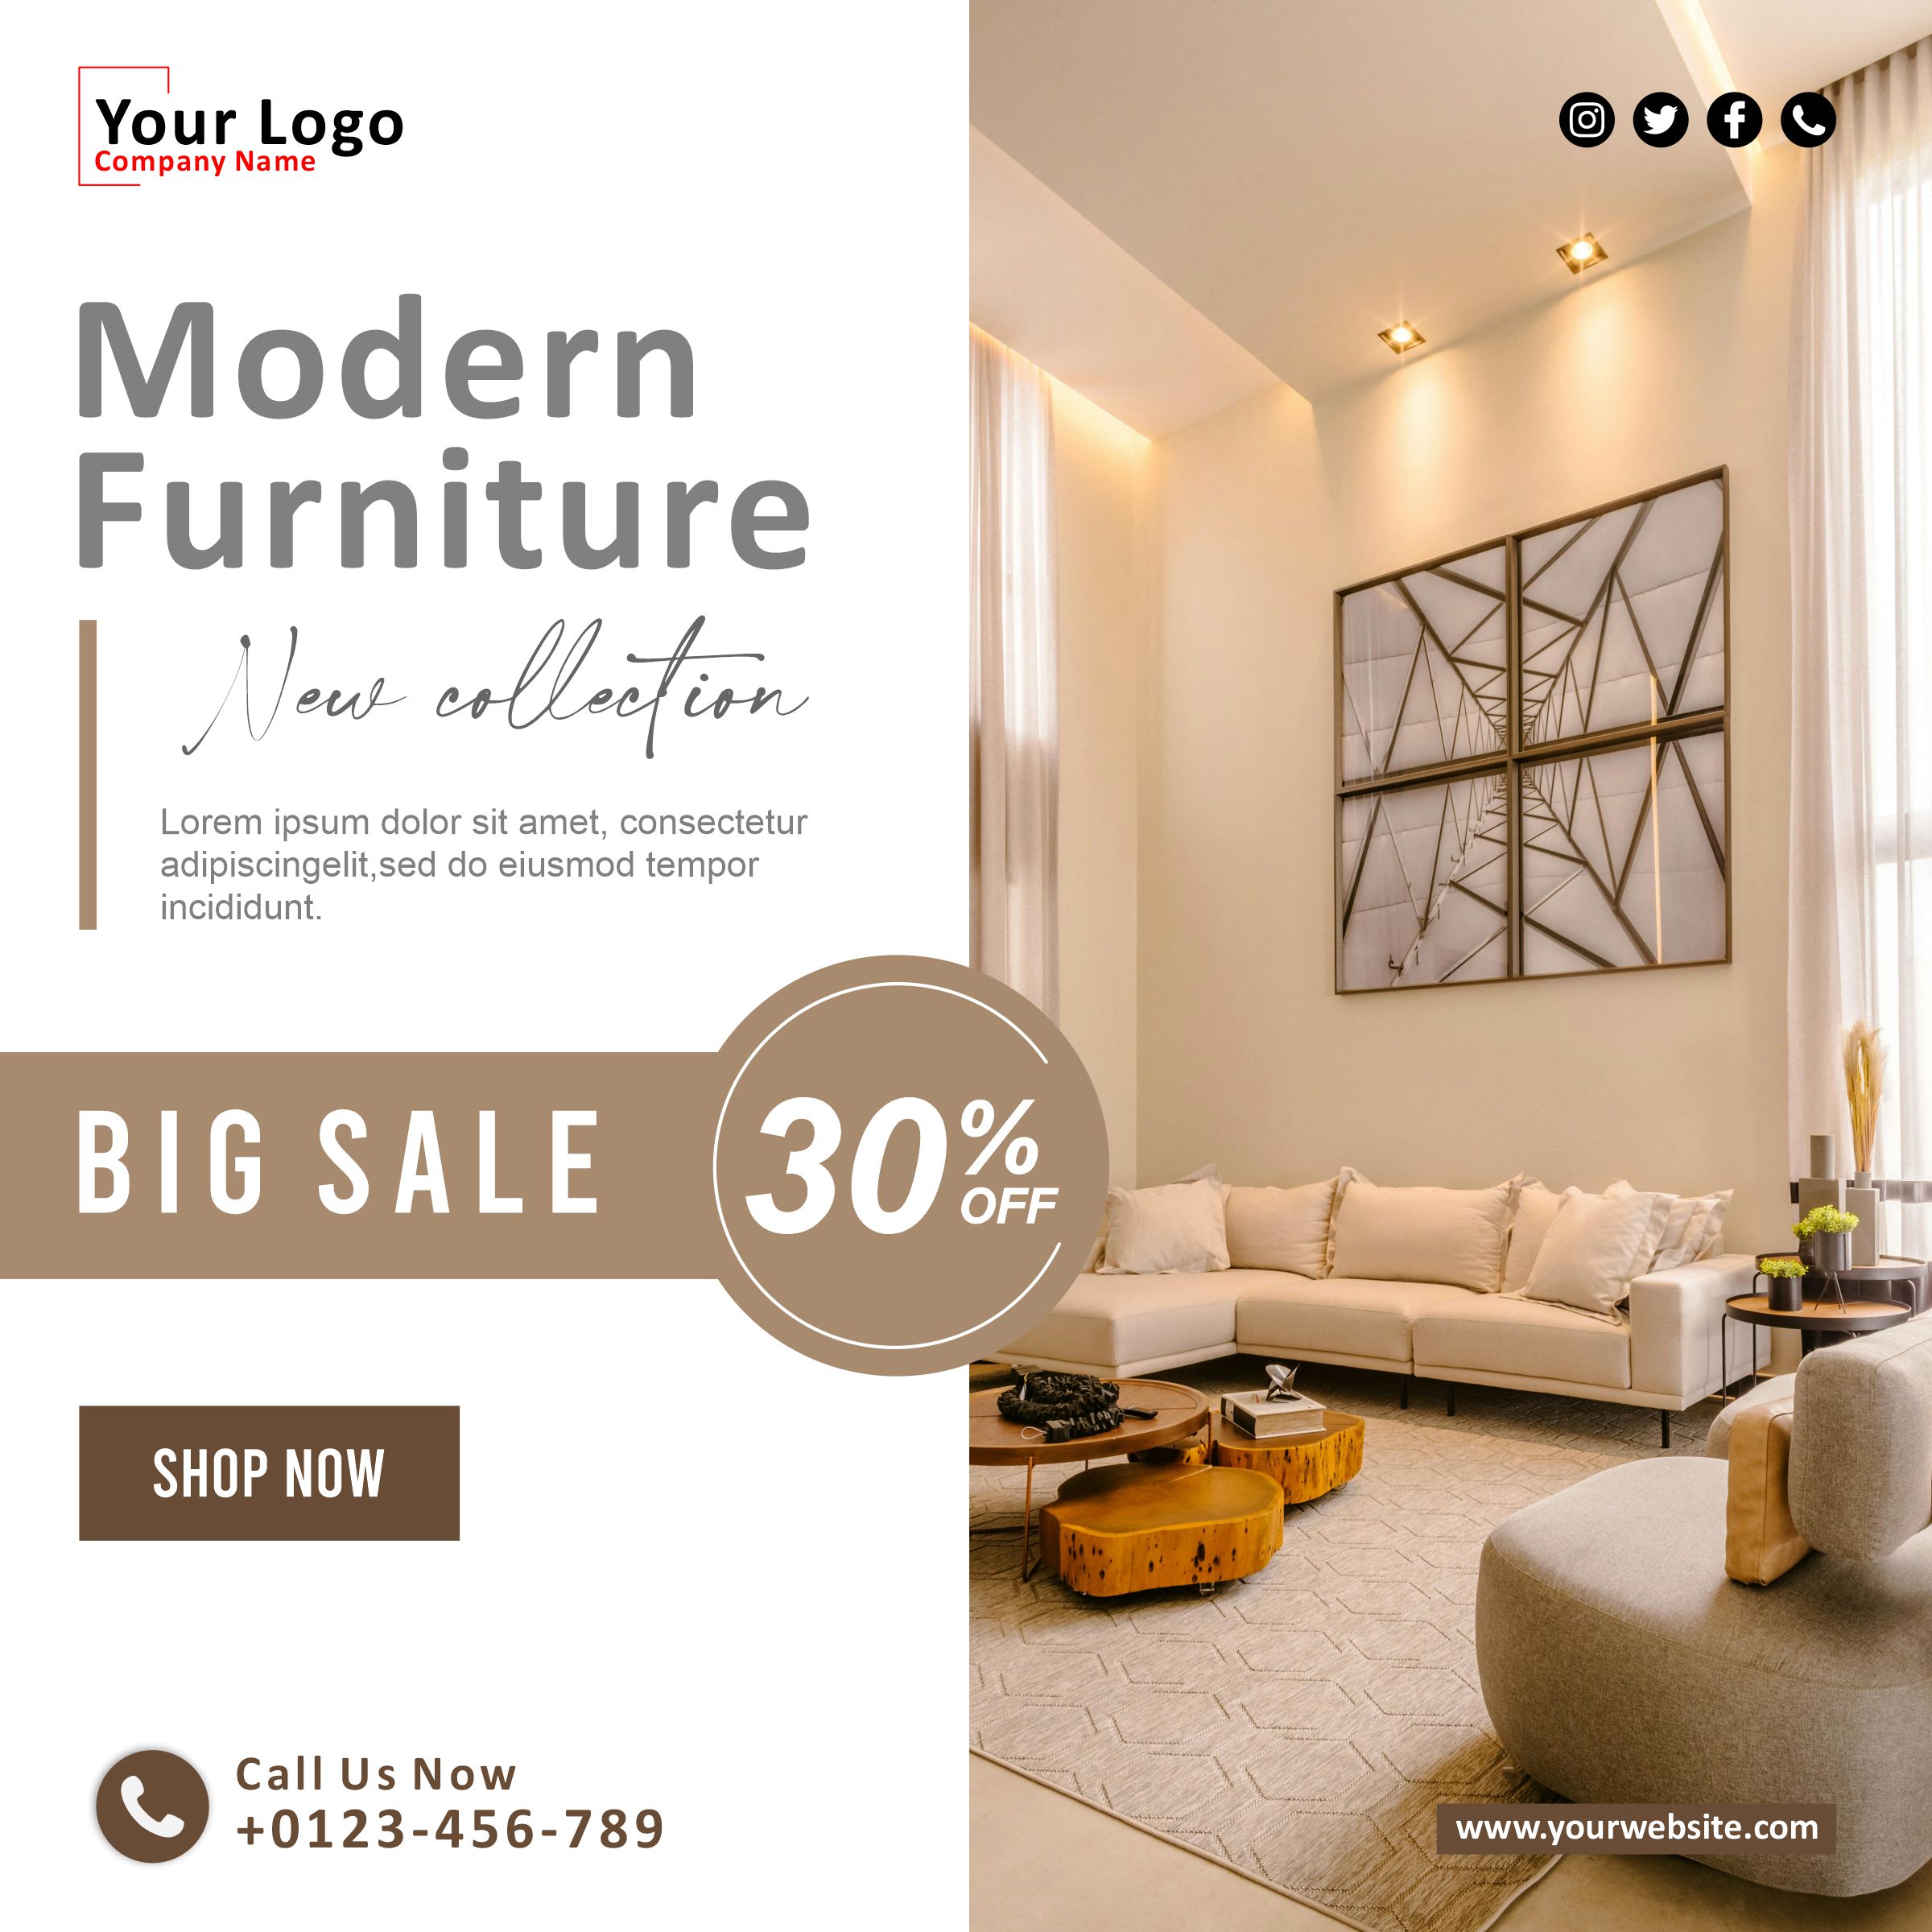 Modern Furniture New Collection  Sale Creactivity & Design in Corel Draw  For Free In Corel Draw Design 2024